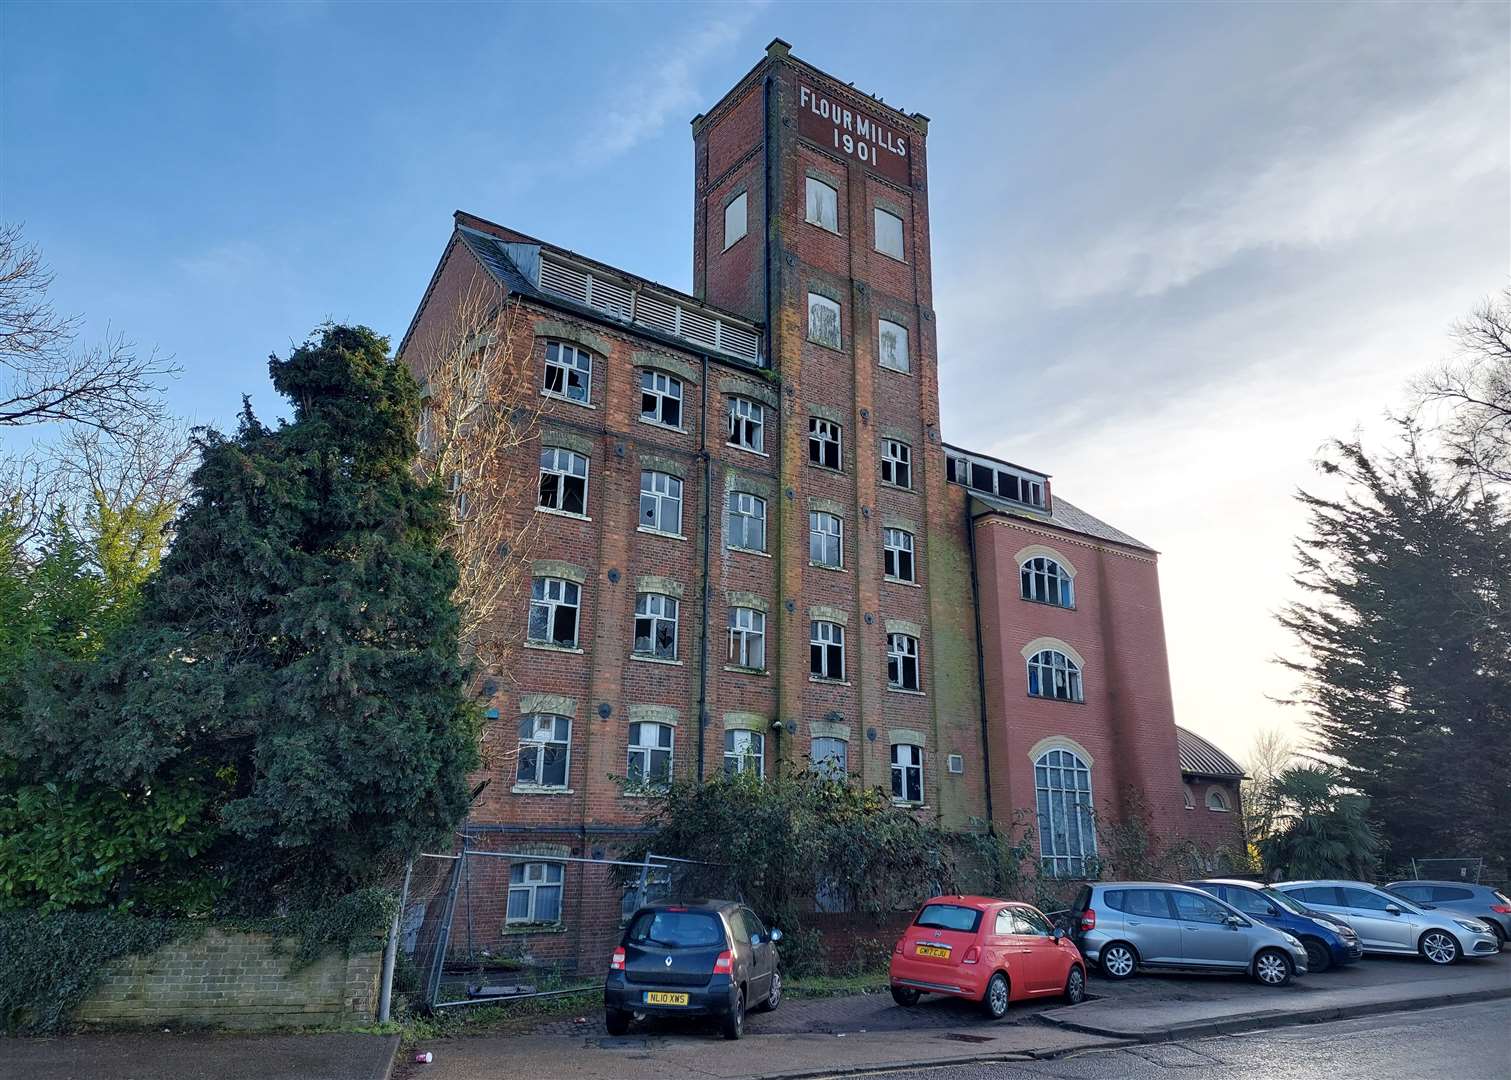 The landmark site sits at the bottom of East Hill near Ashford town centre